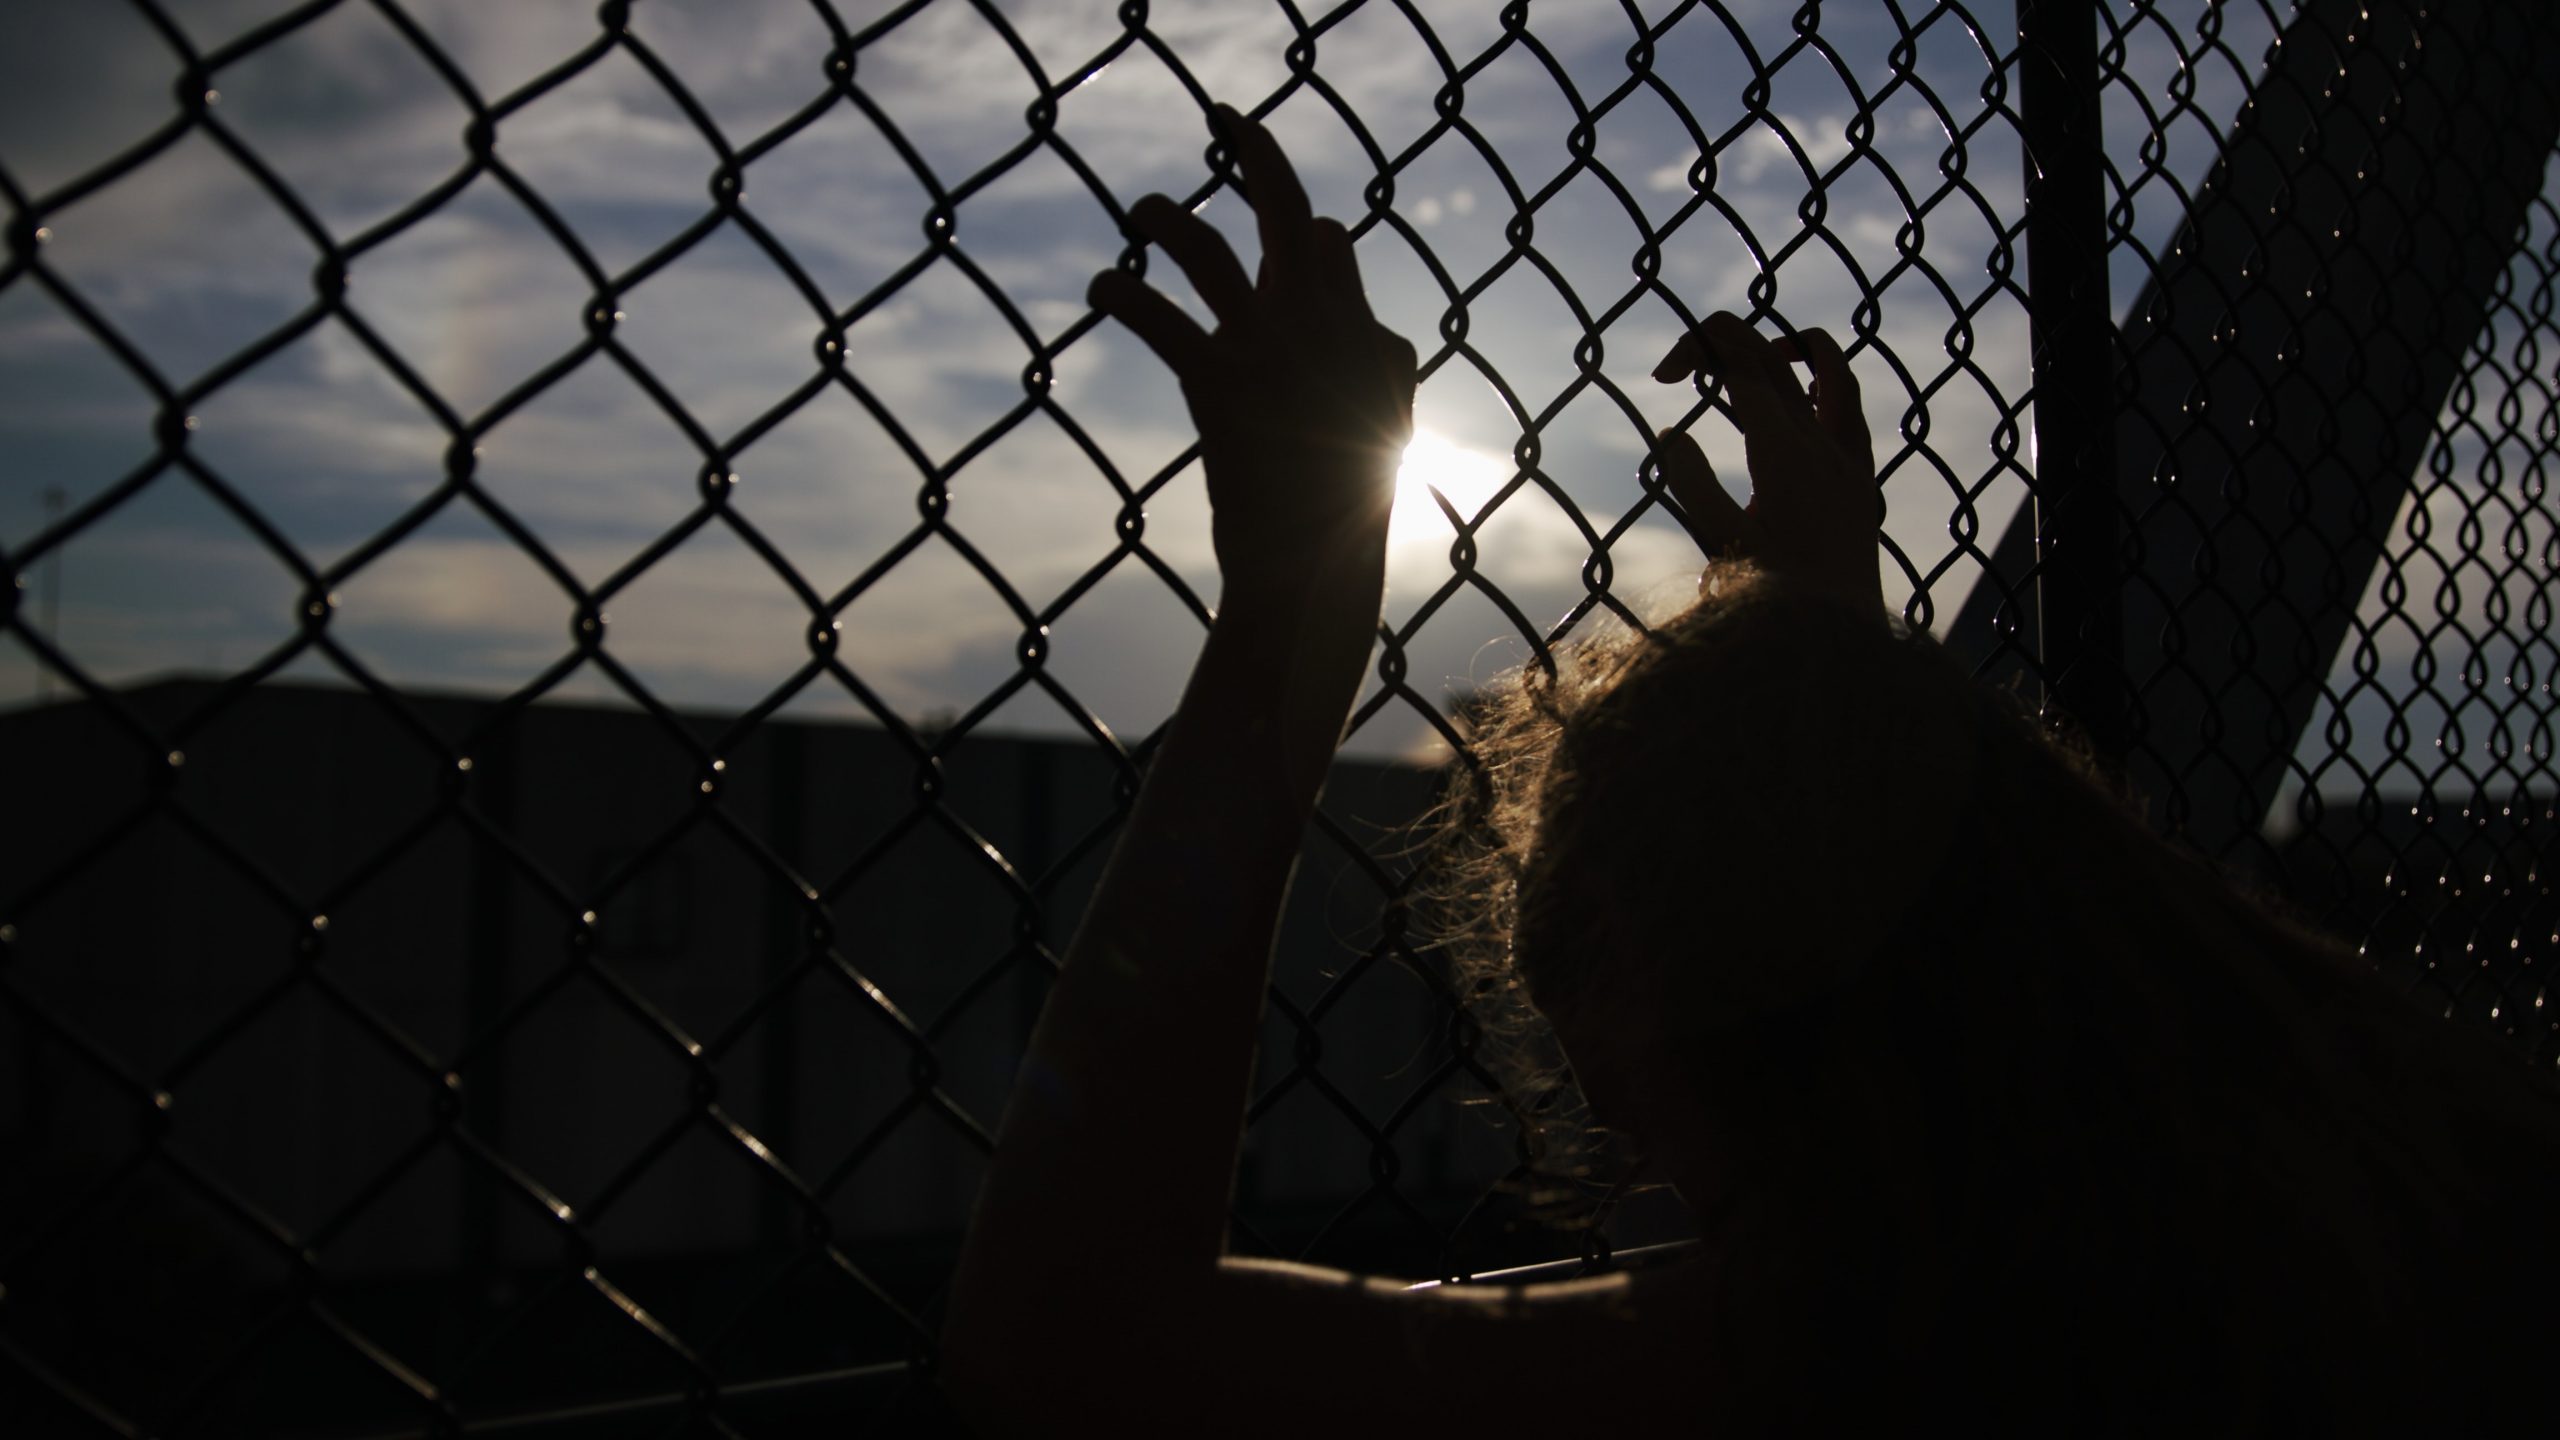 Image of a person holding on chain link fence.